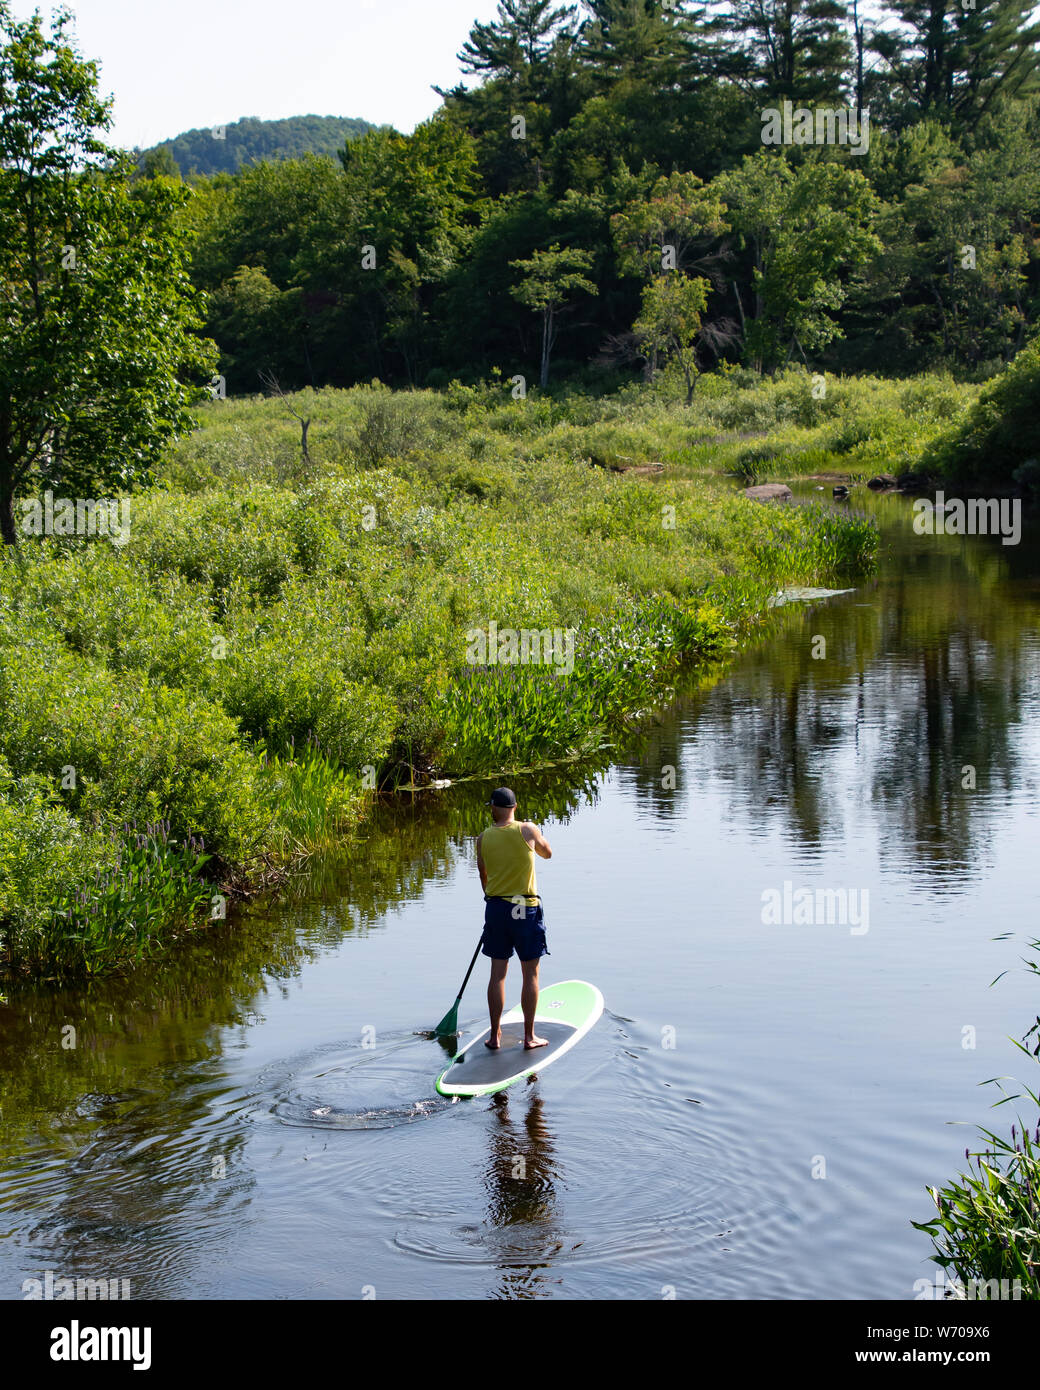 A man paddling a paddle board on the Sacandaga River at the outlet from Lake Pleasant in the Adirondack Mountains, NY USA Stock Photo